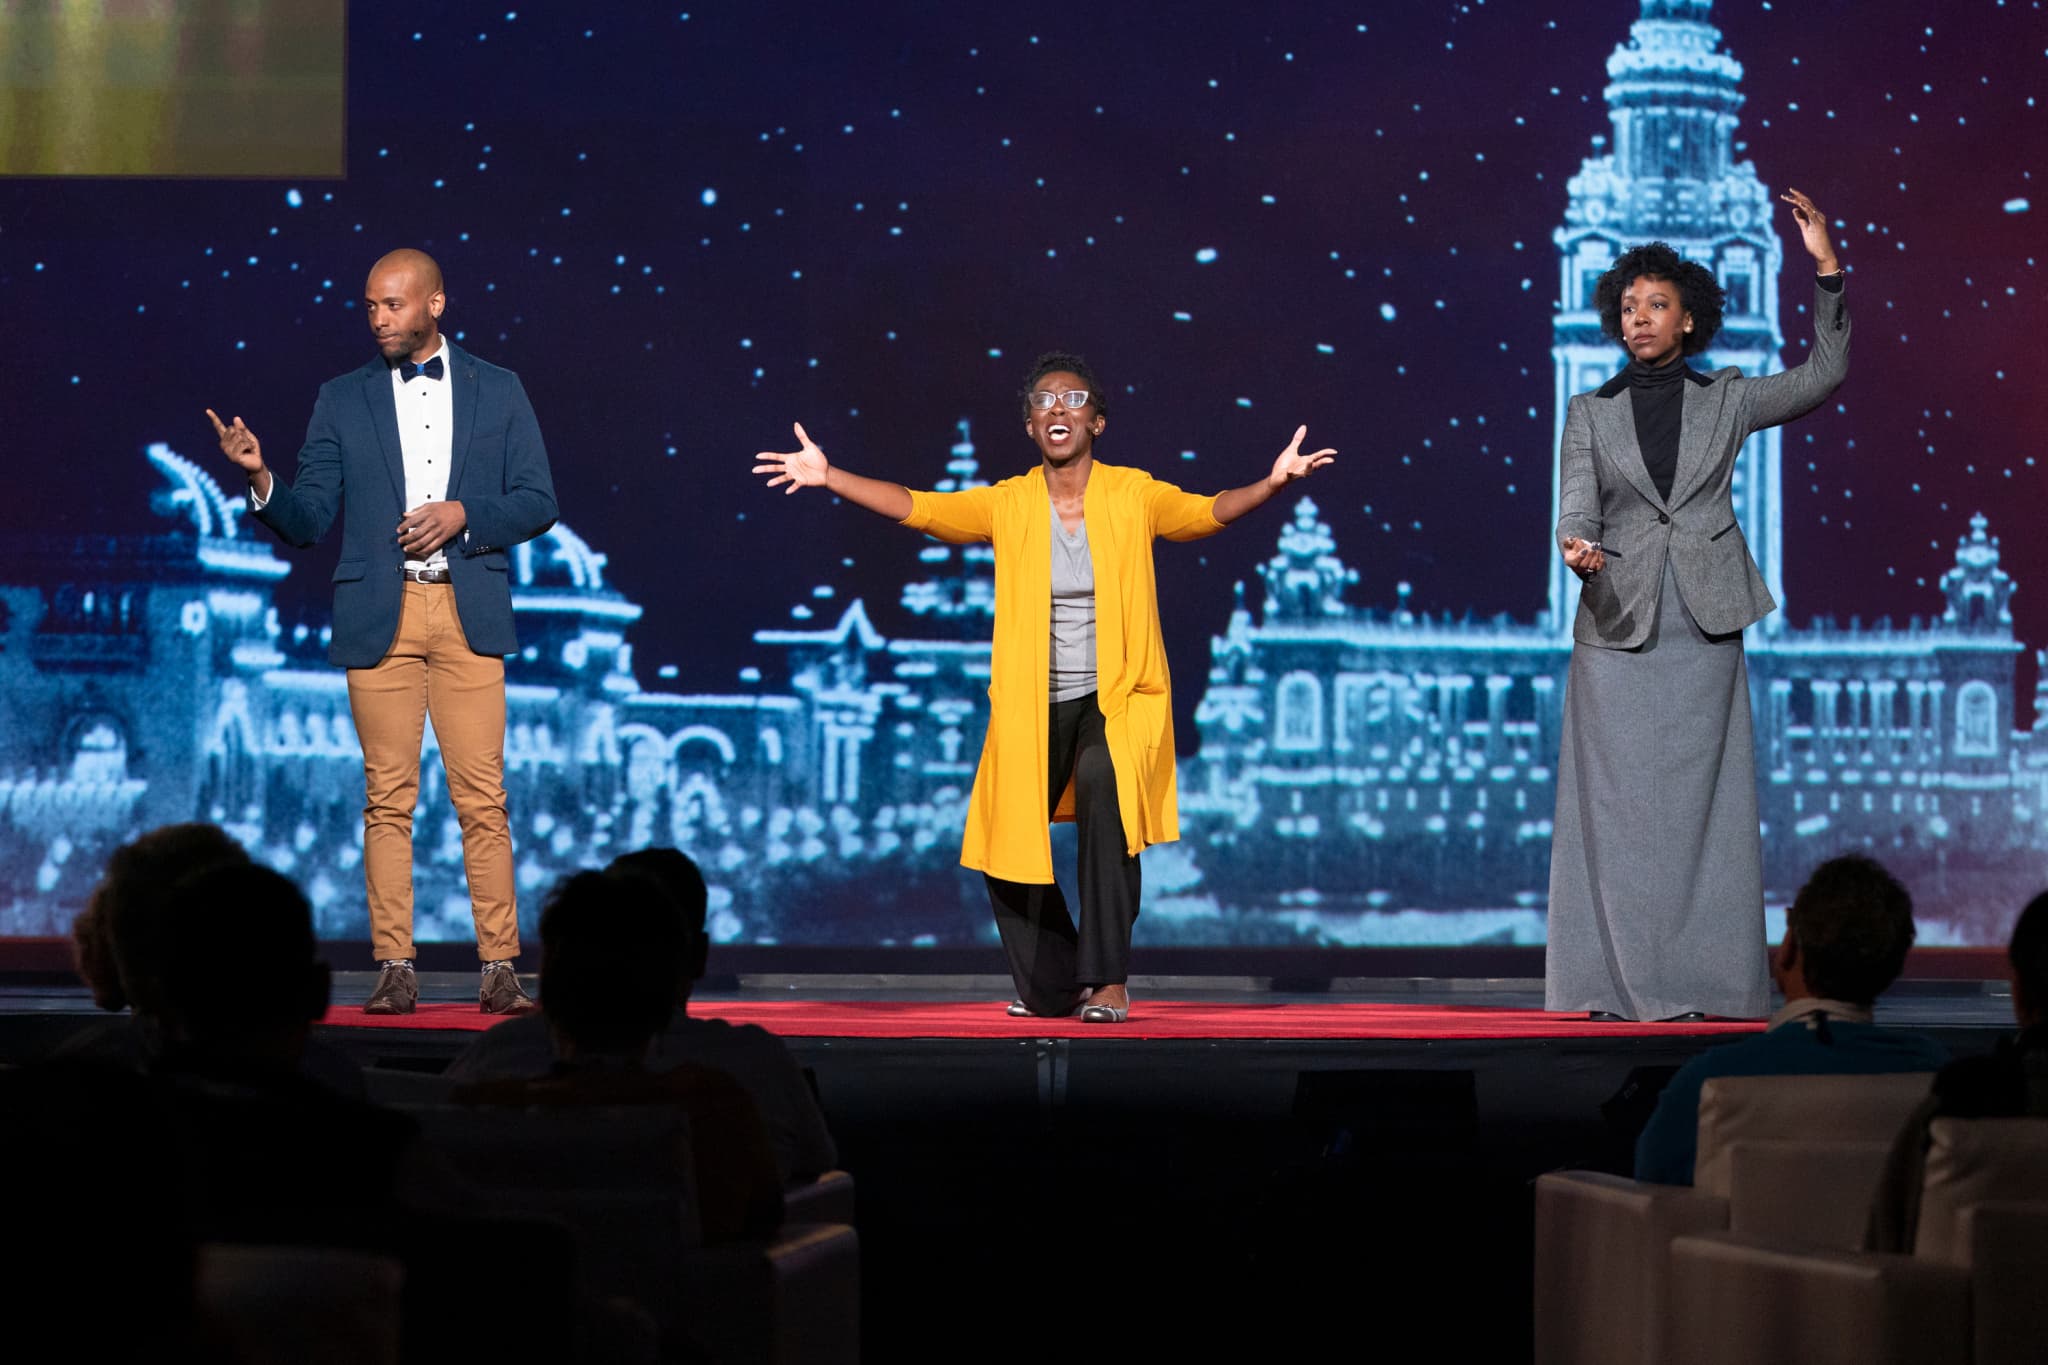 “One with each other”: Notes from Session 1 of TED2019 Fellows talks